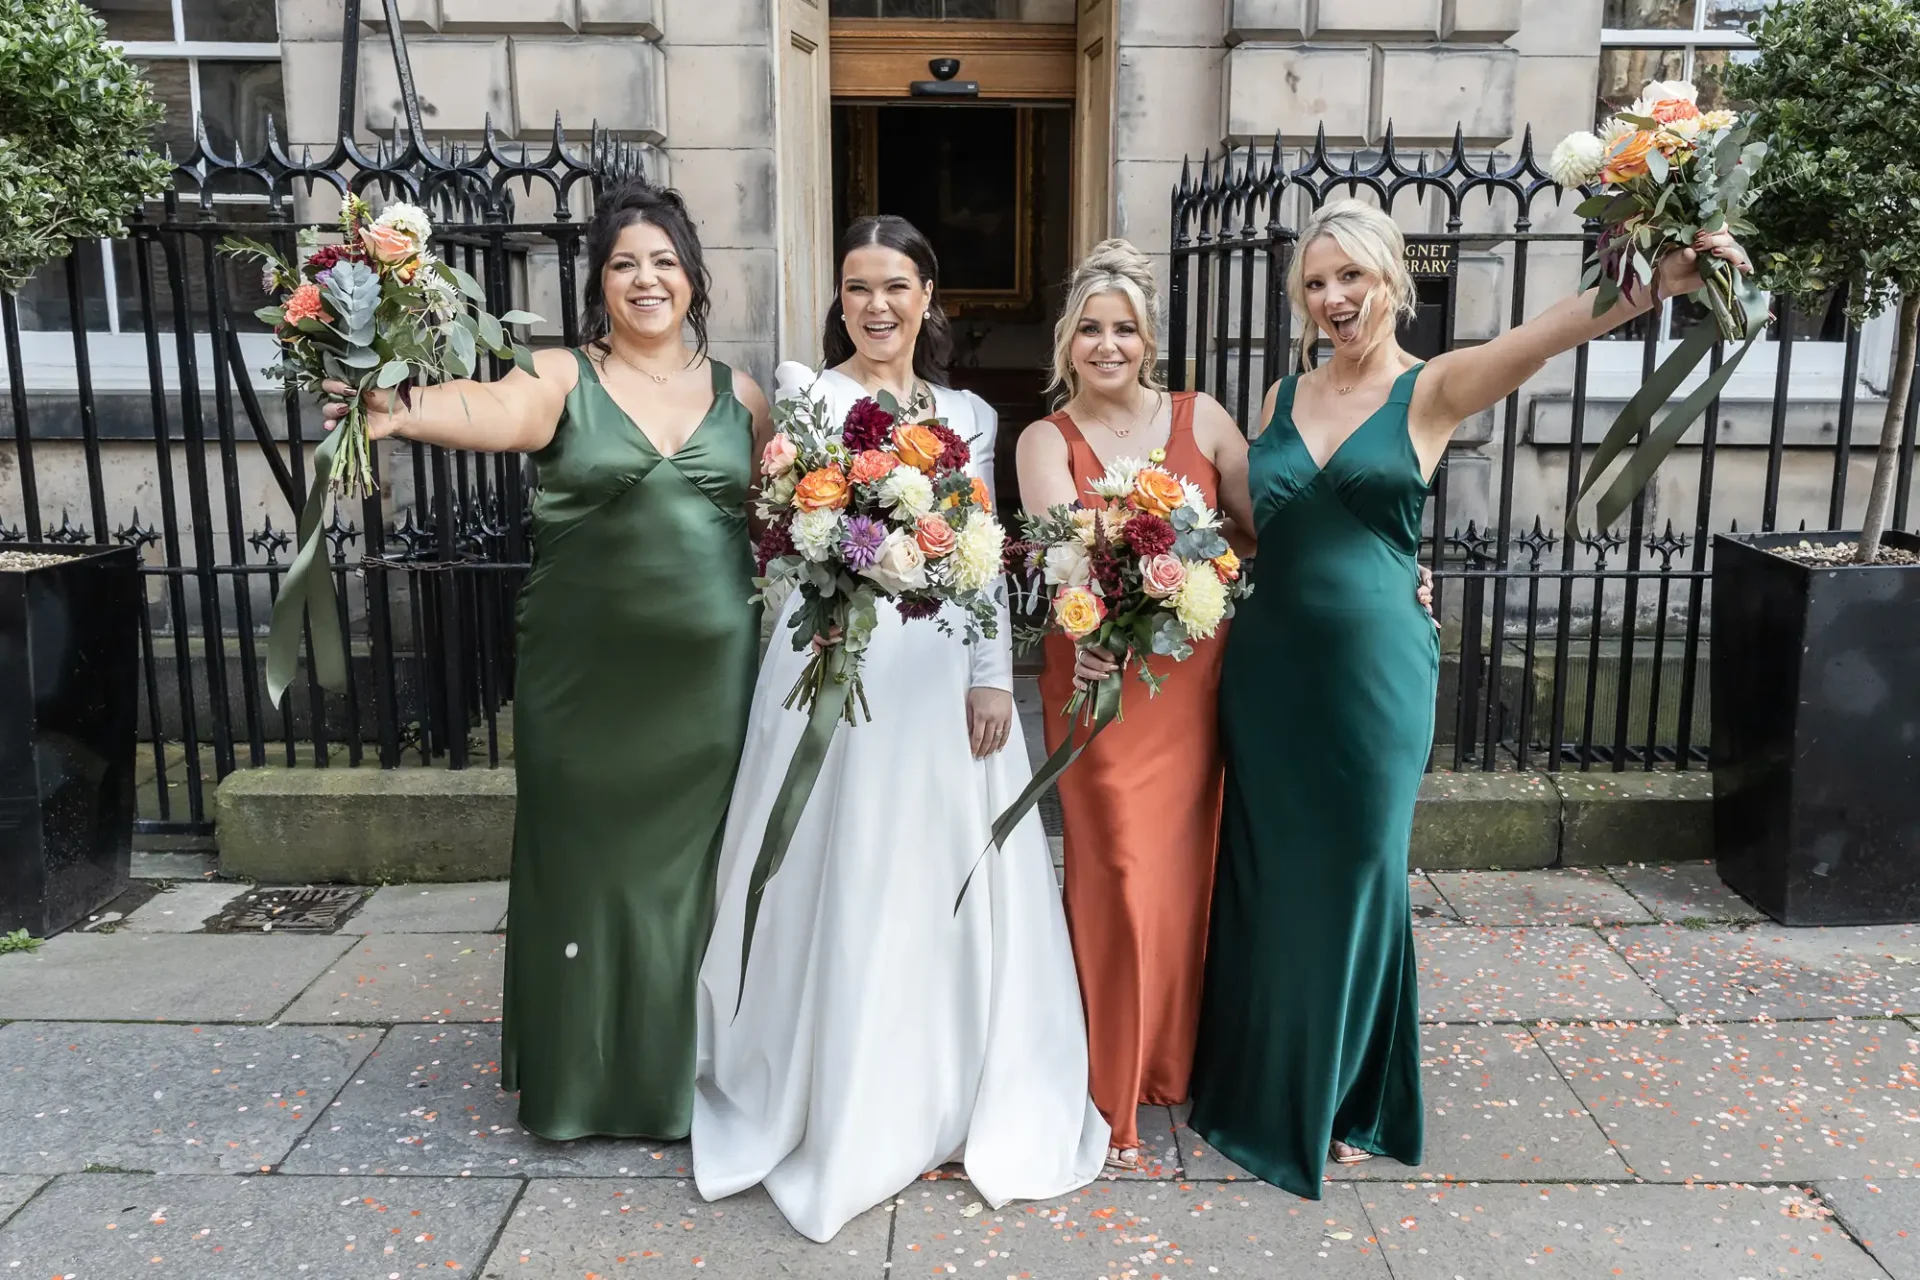 Four women in formal dresses, one in white and three in green, hold large bouquets and pose smiling on a city street.